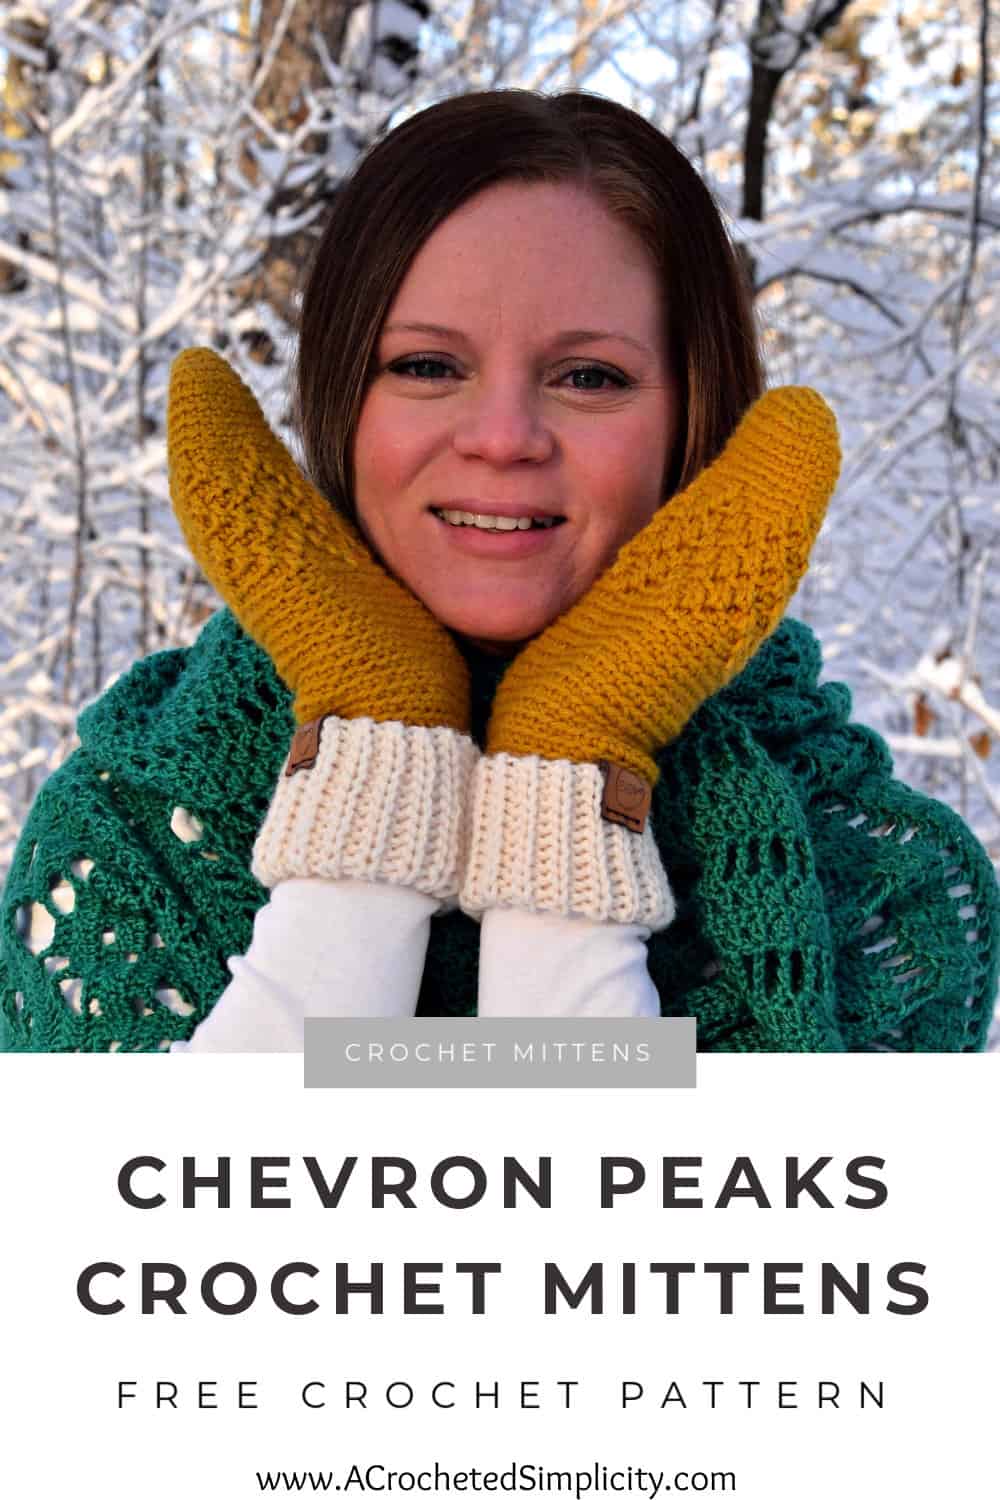 Cream and gold crochet mittens modeled by young woman pinterest image